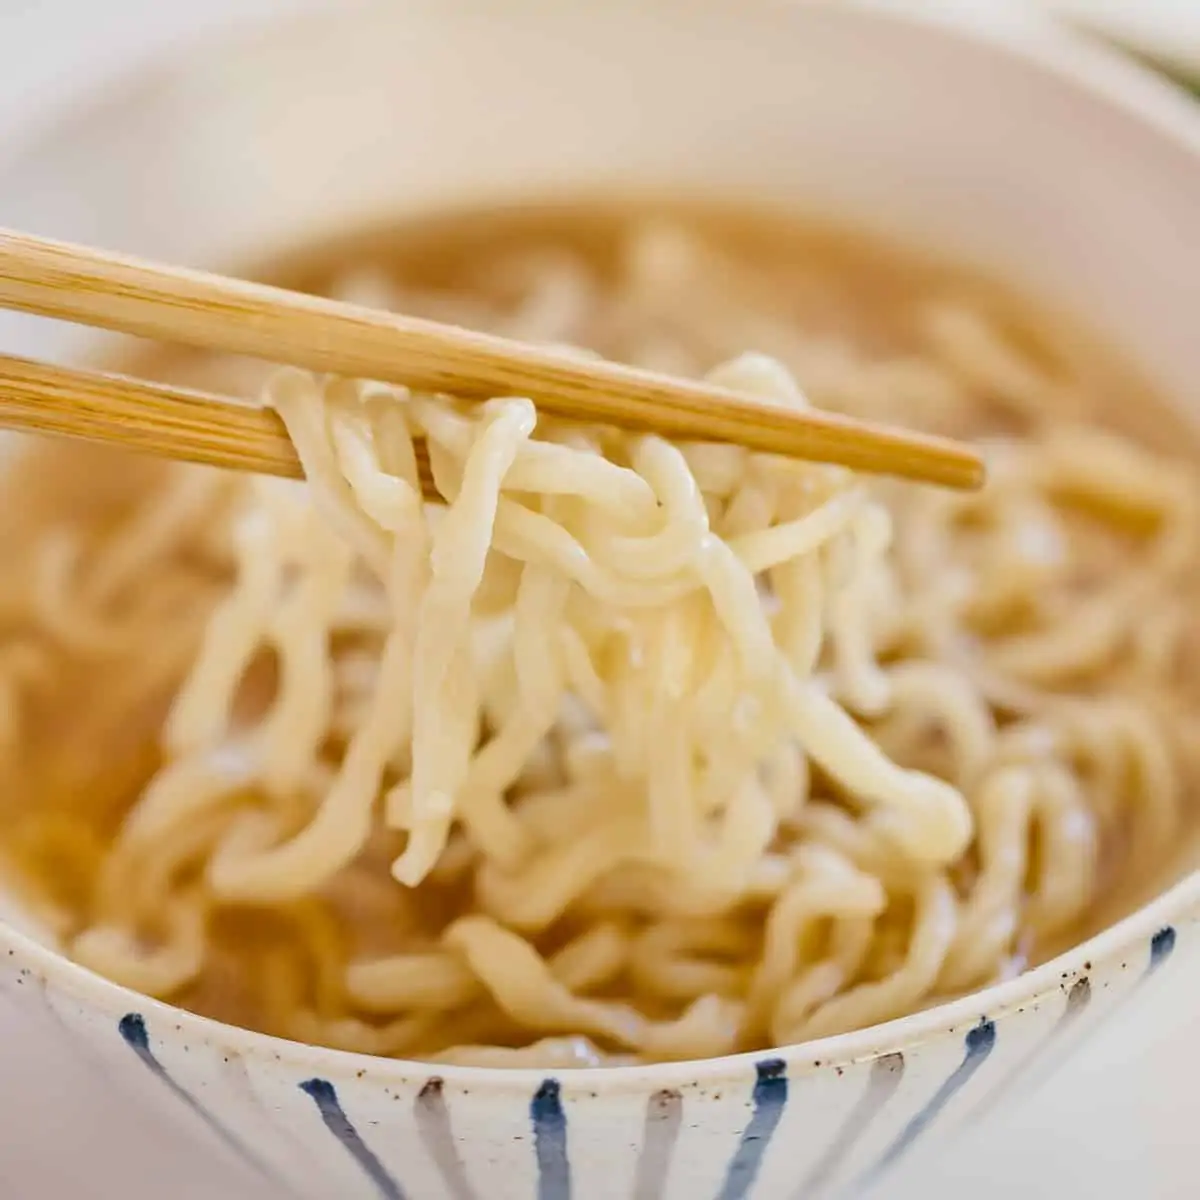 homemade ramen noodles cooked and served with ramen broth